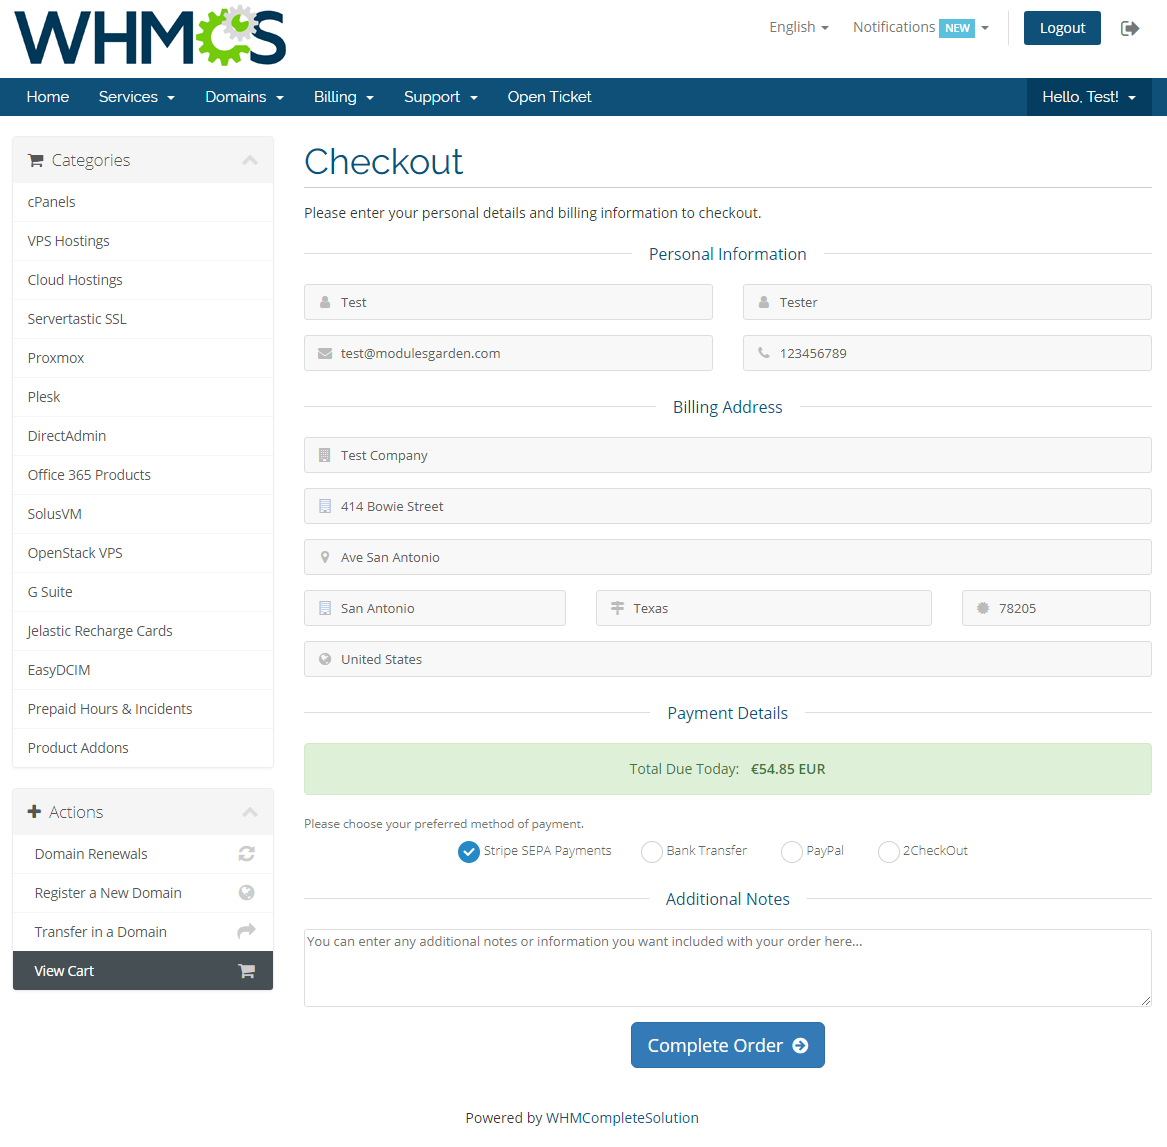 Stripe SEPA Payments For WHMCS: Screen 2